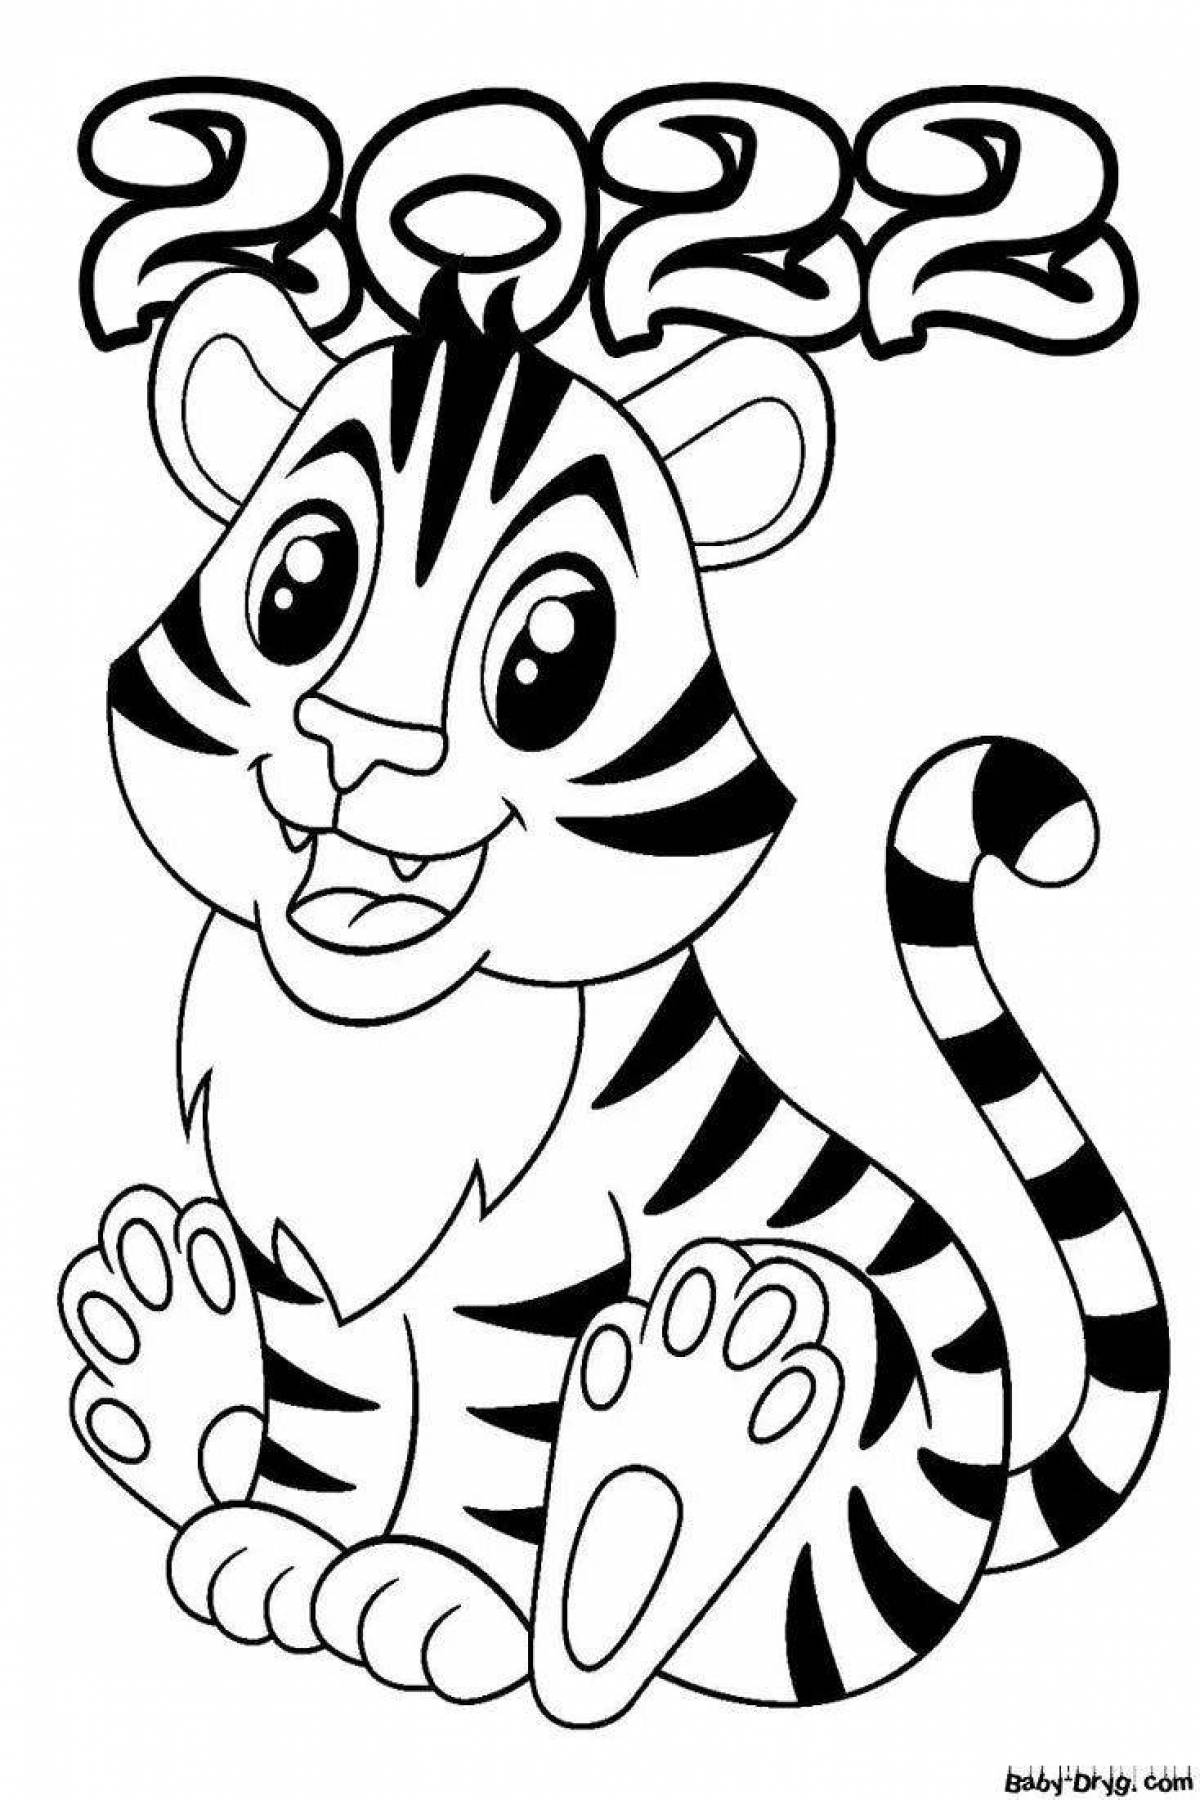 Dazzling tiger coloring book for kids 6-7 years old